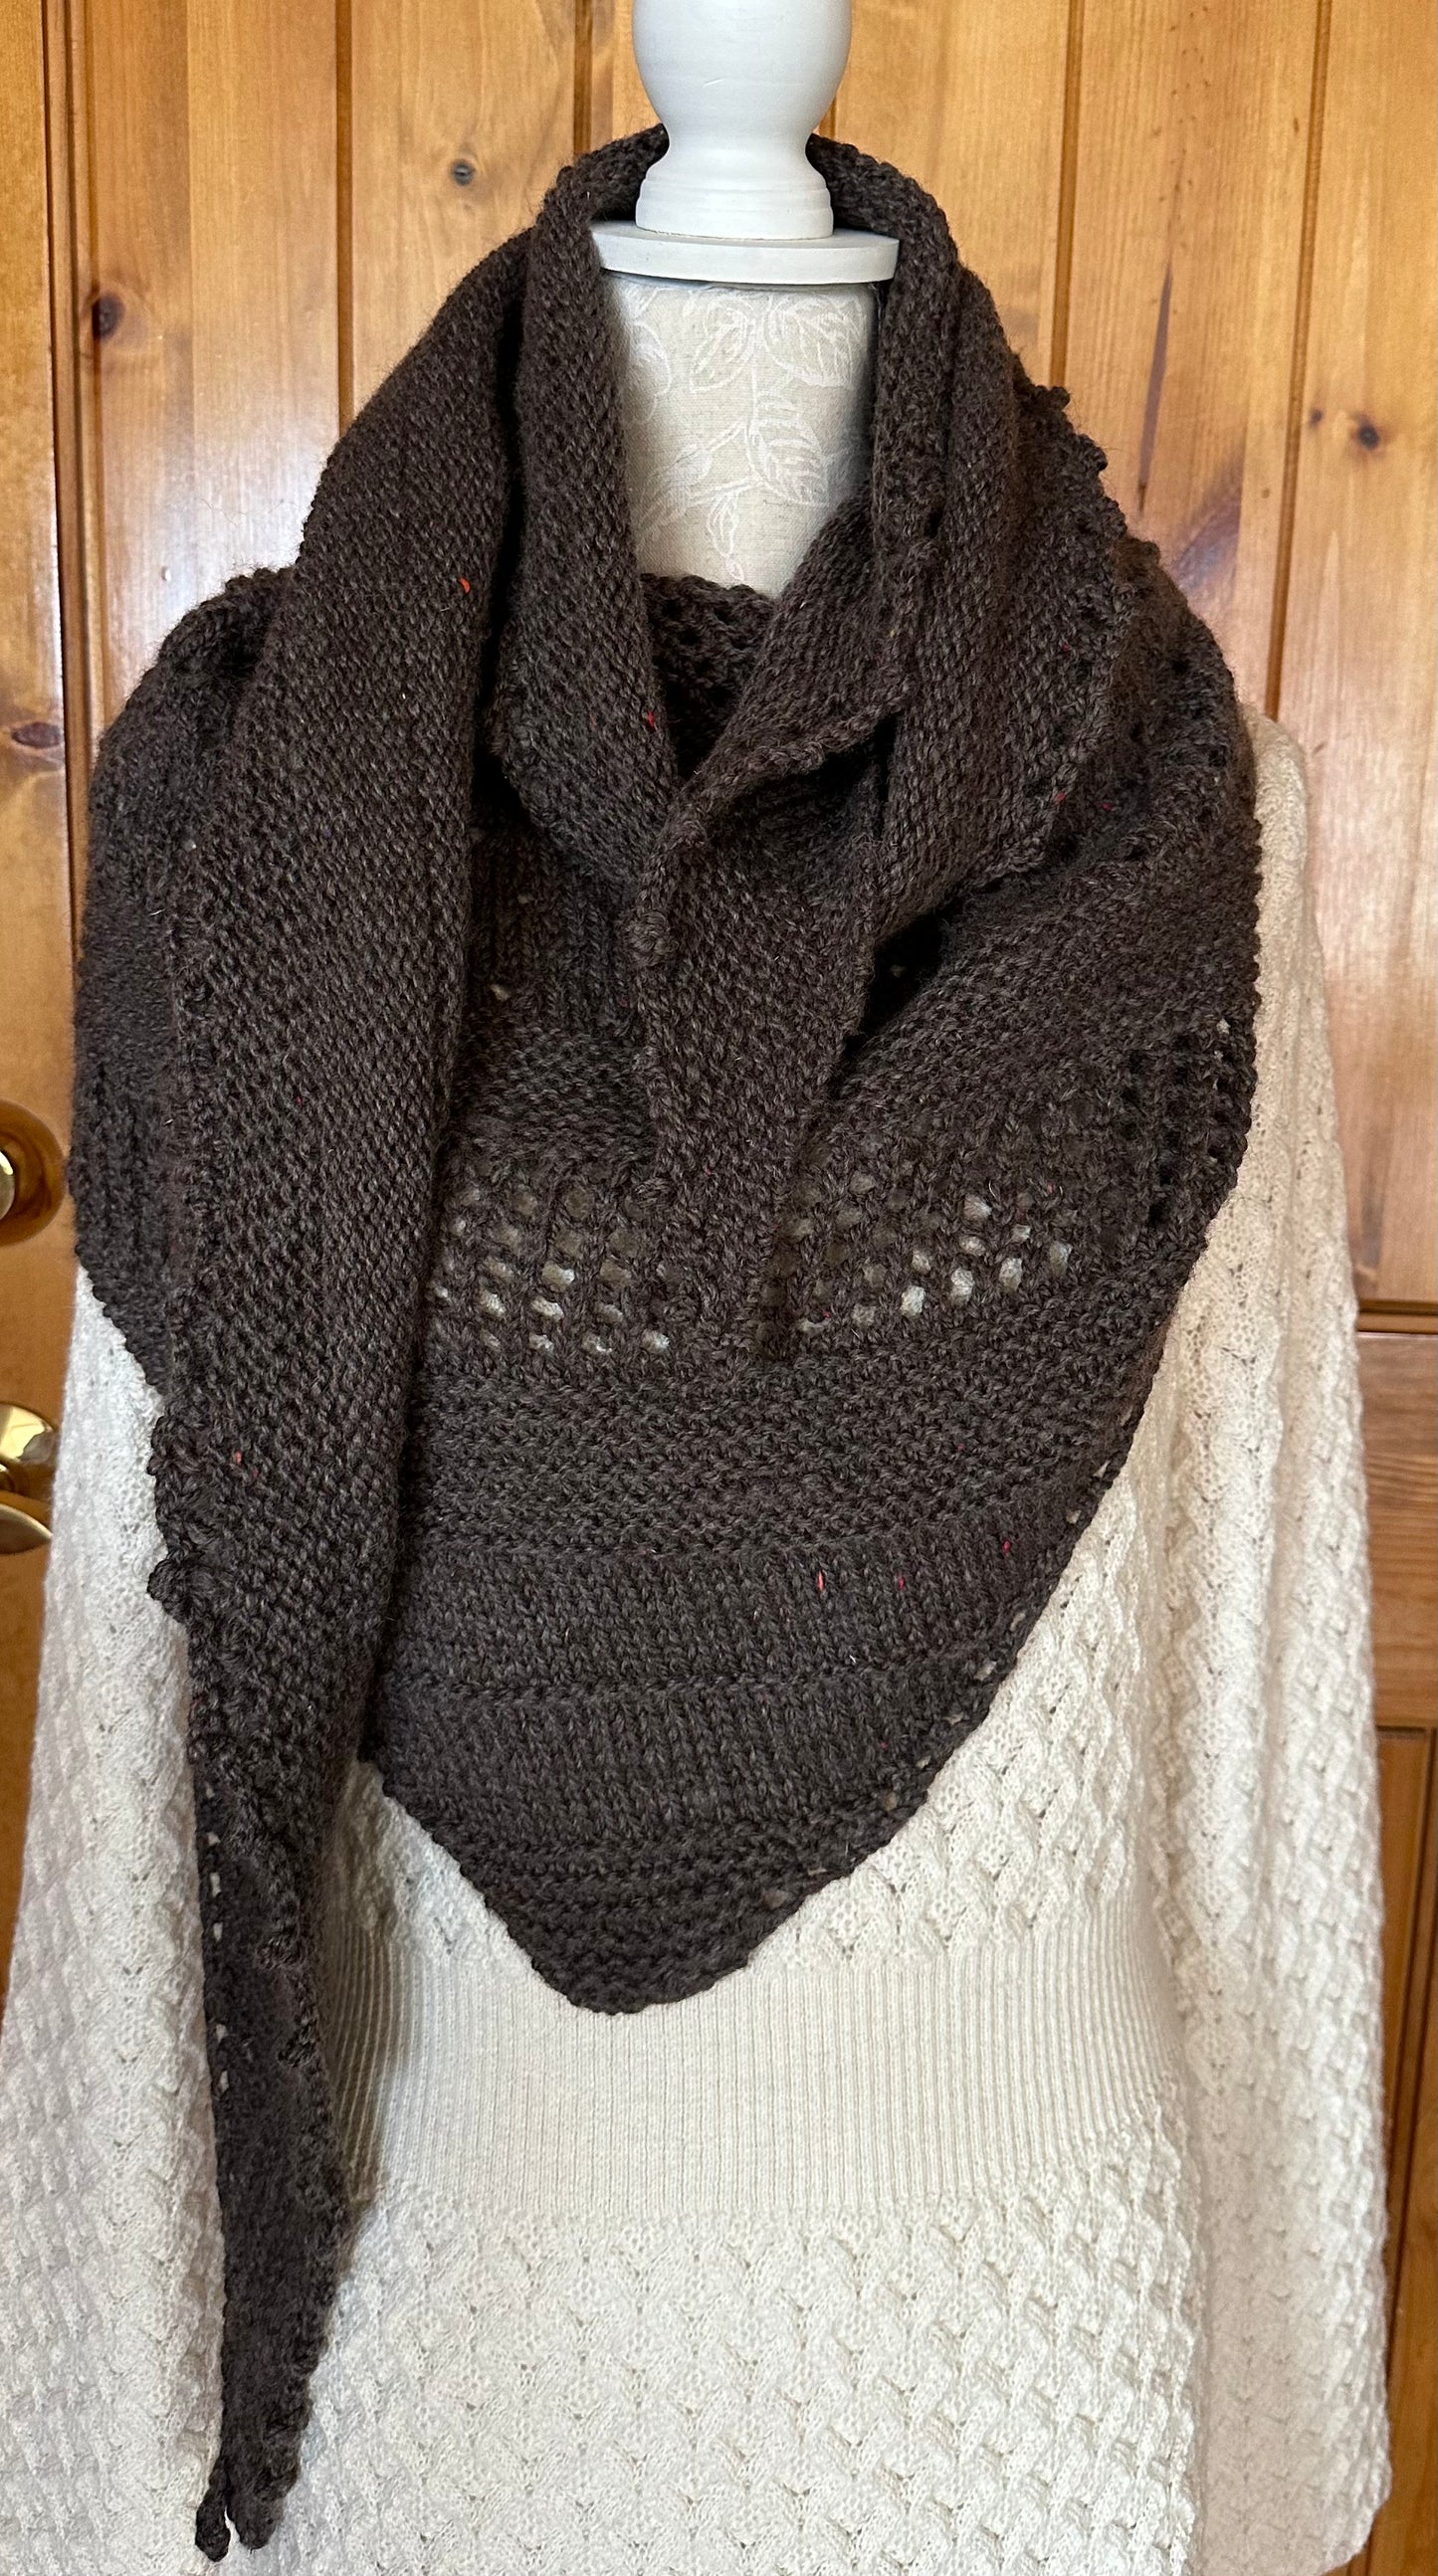 Shawl/Lace Scarf by Thorn